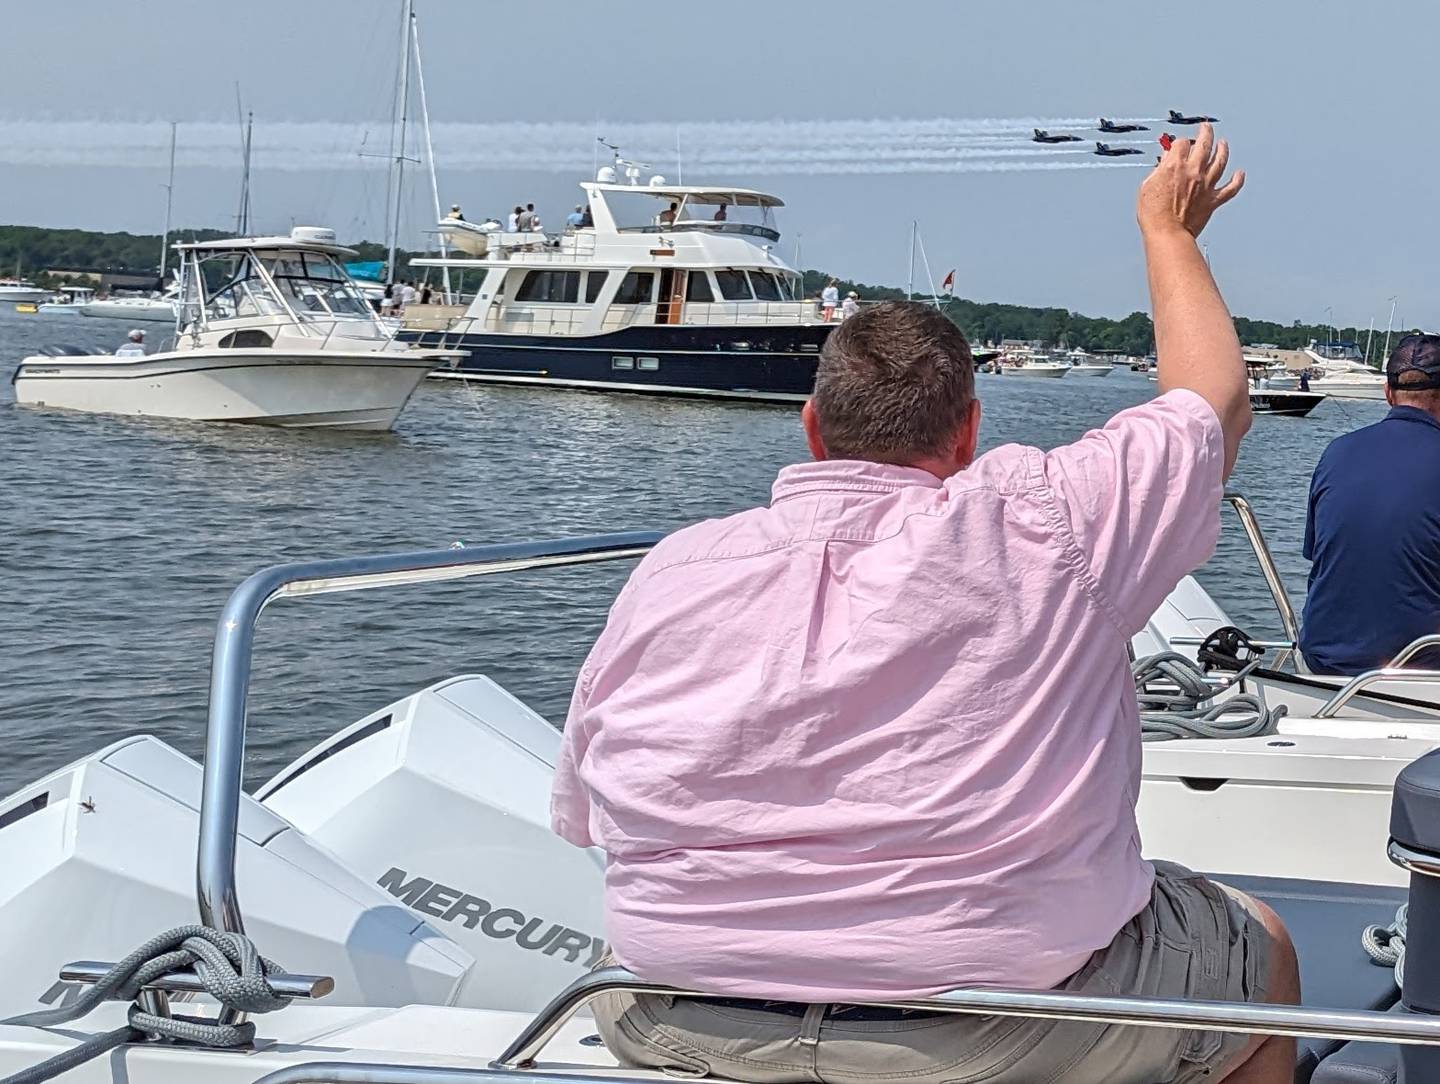 A spectator waves at the Blue Angels as they fly over the Severn River Wednesday in Annapolis.